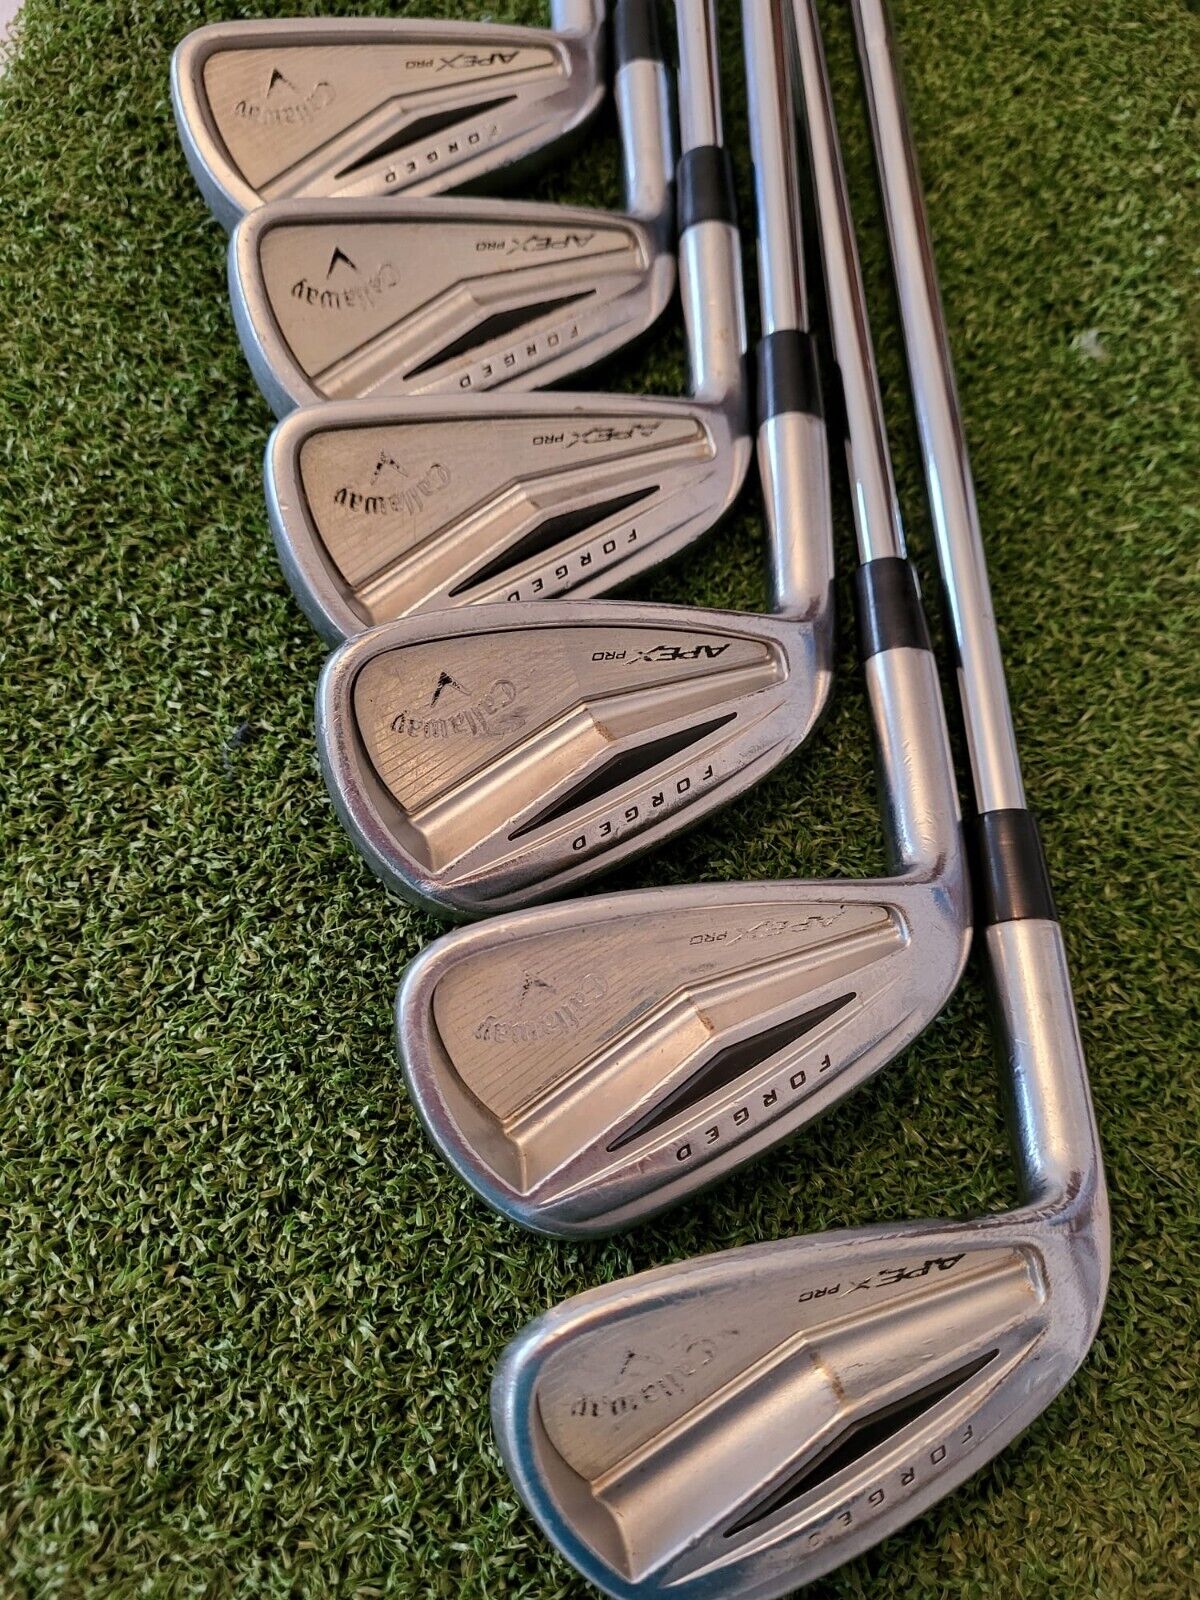 Left Handed Callaway Apex Pro 13 Forged Iron set 4-PW NS Pro 950gh Stiff Shafts